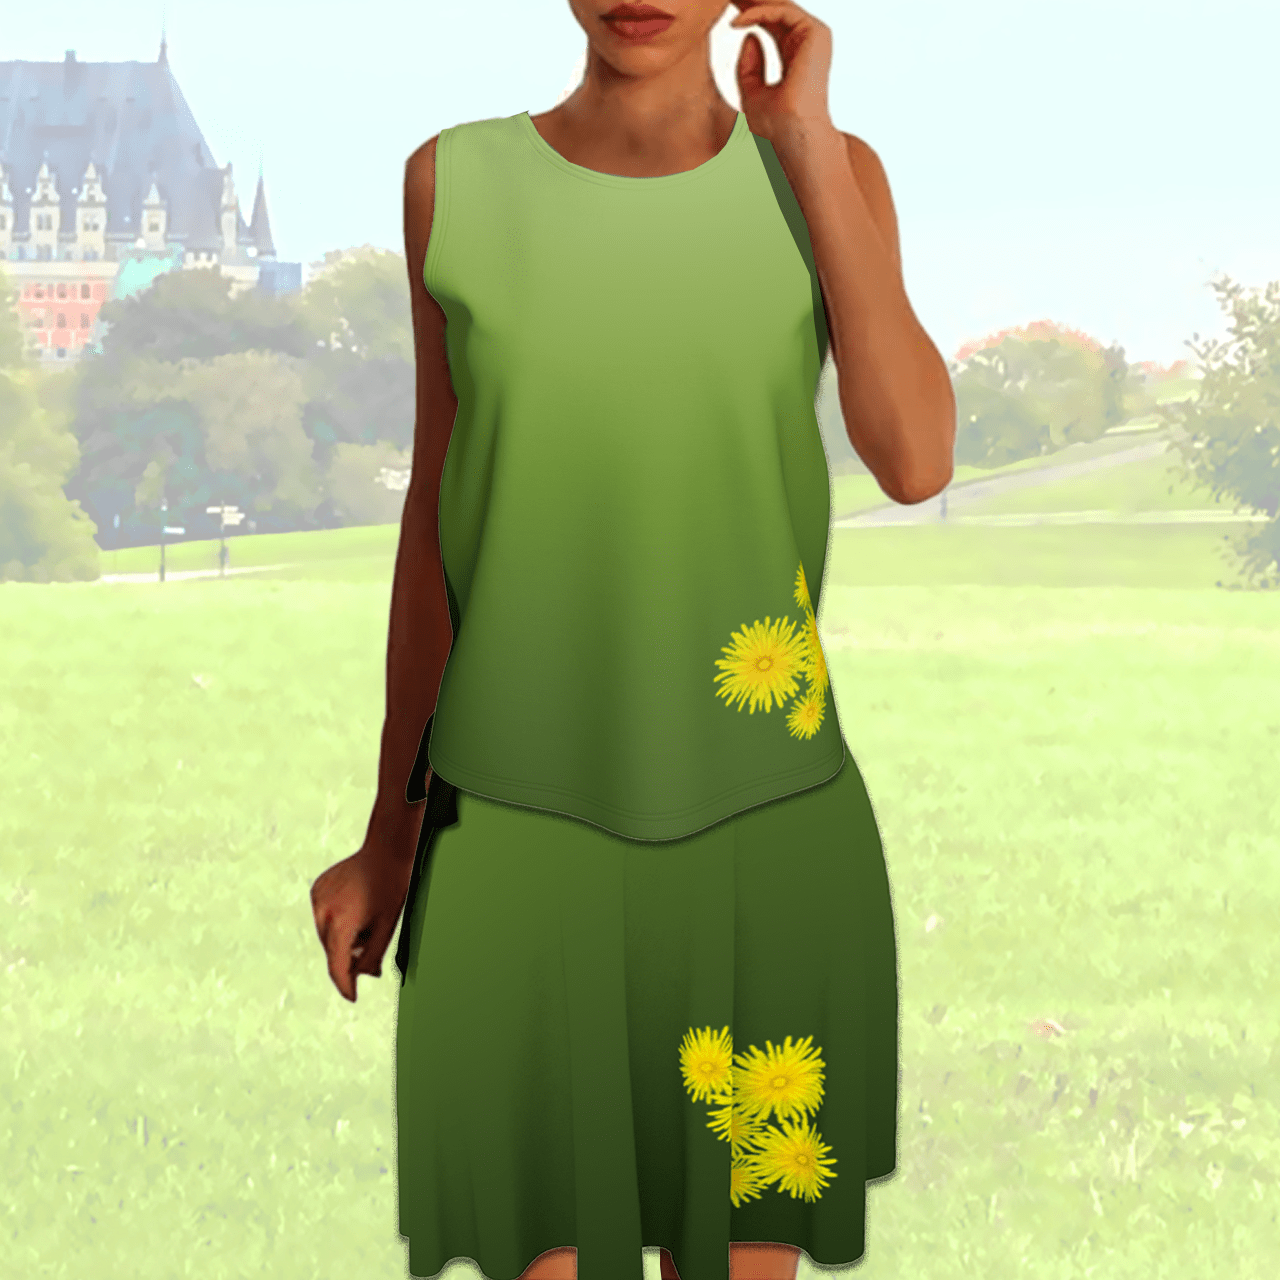 FLOWERS - Wrapped Skirts - Green & Yellow